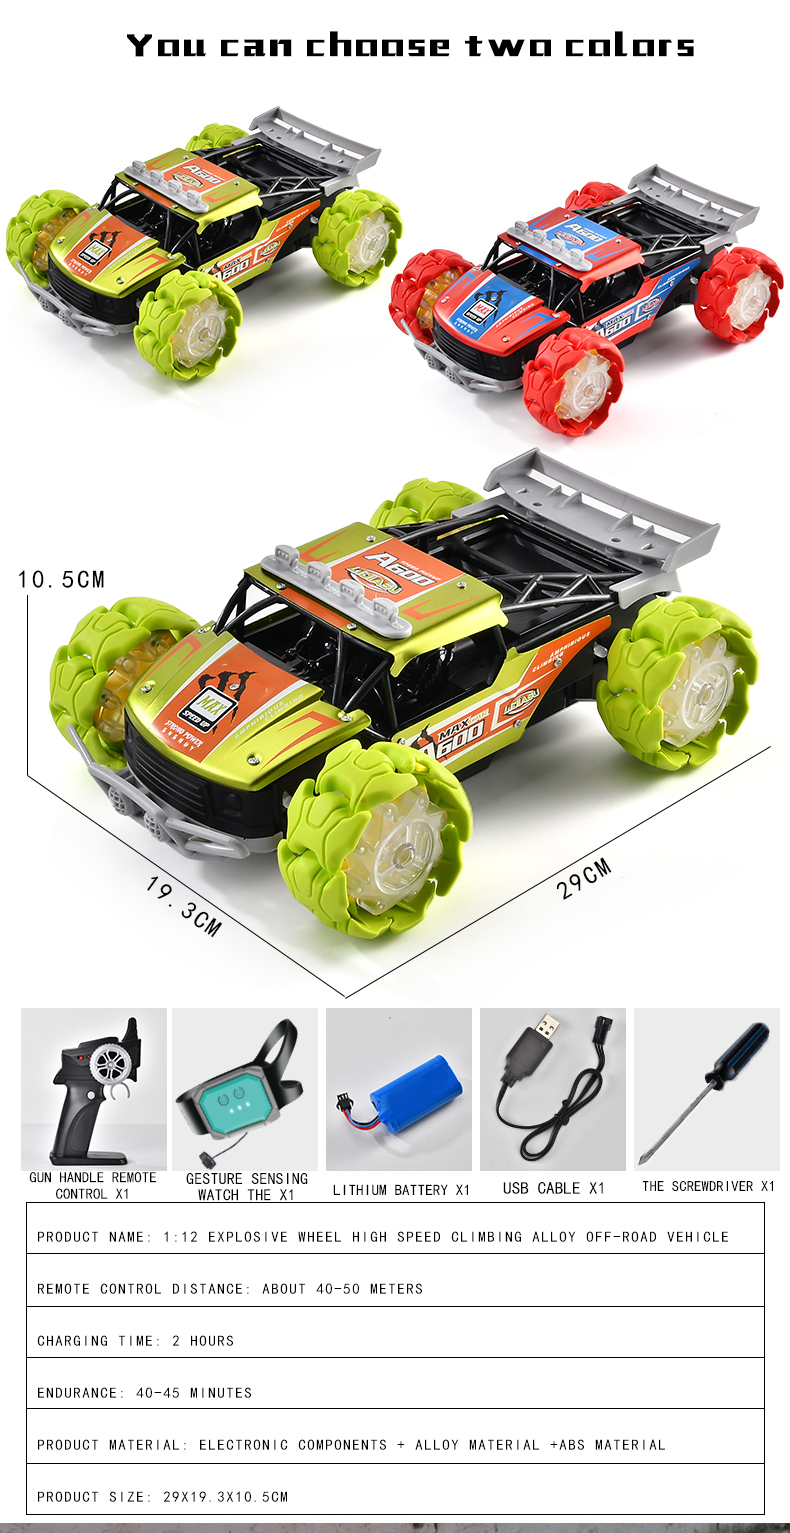 Gesture explosive rc car 1:12 double controller Radio Control Toy Off-road Vehicle for Kids  Gesture explosive rc car 1:12 double controller Radio Control Toy Off-road Vehicle for Kids  explosive rc car,gesture rc car